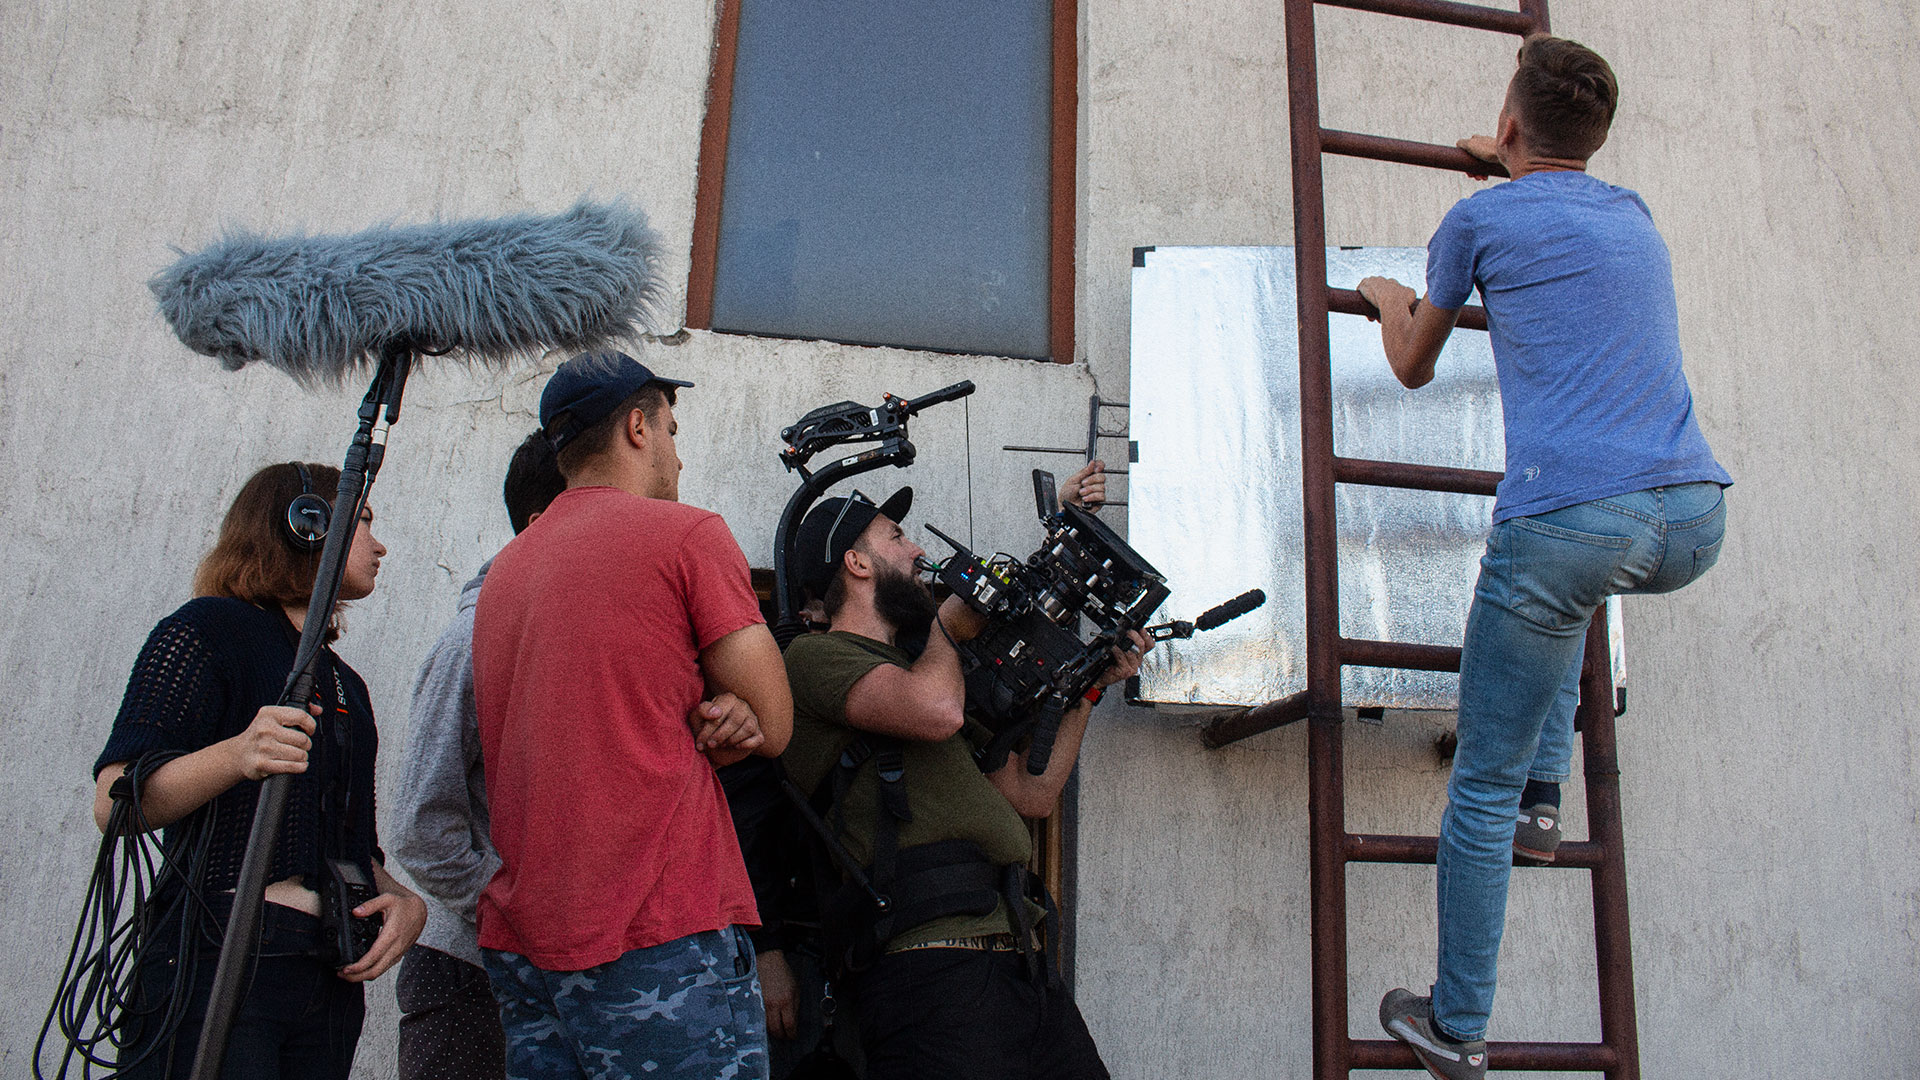 Filming the shot where the main character is climbing up the ladder.